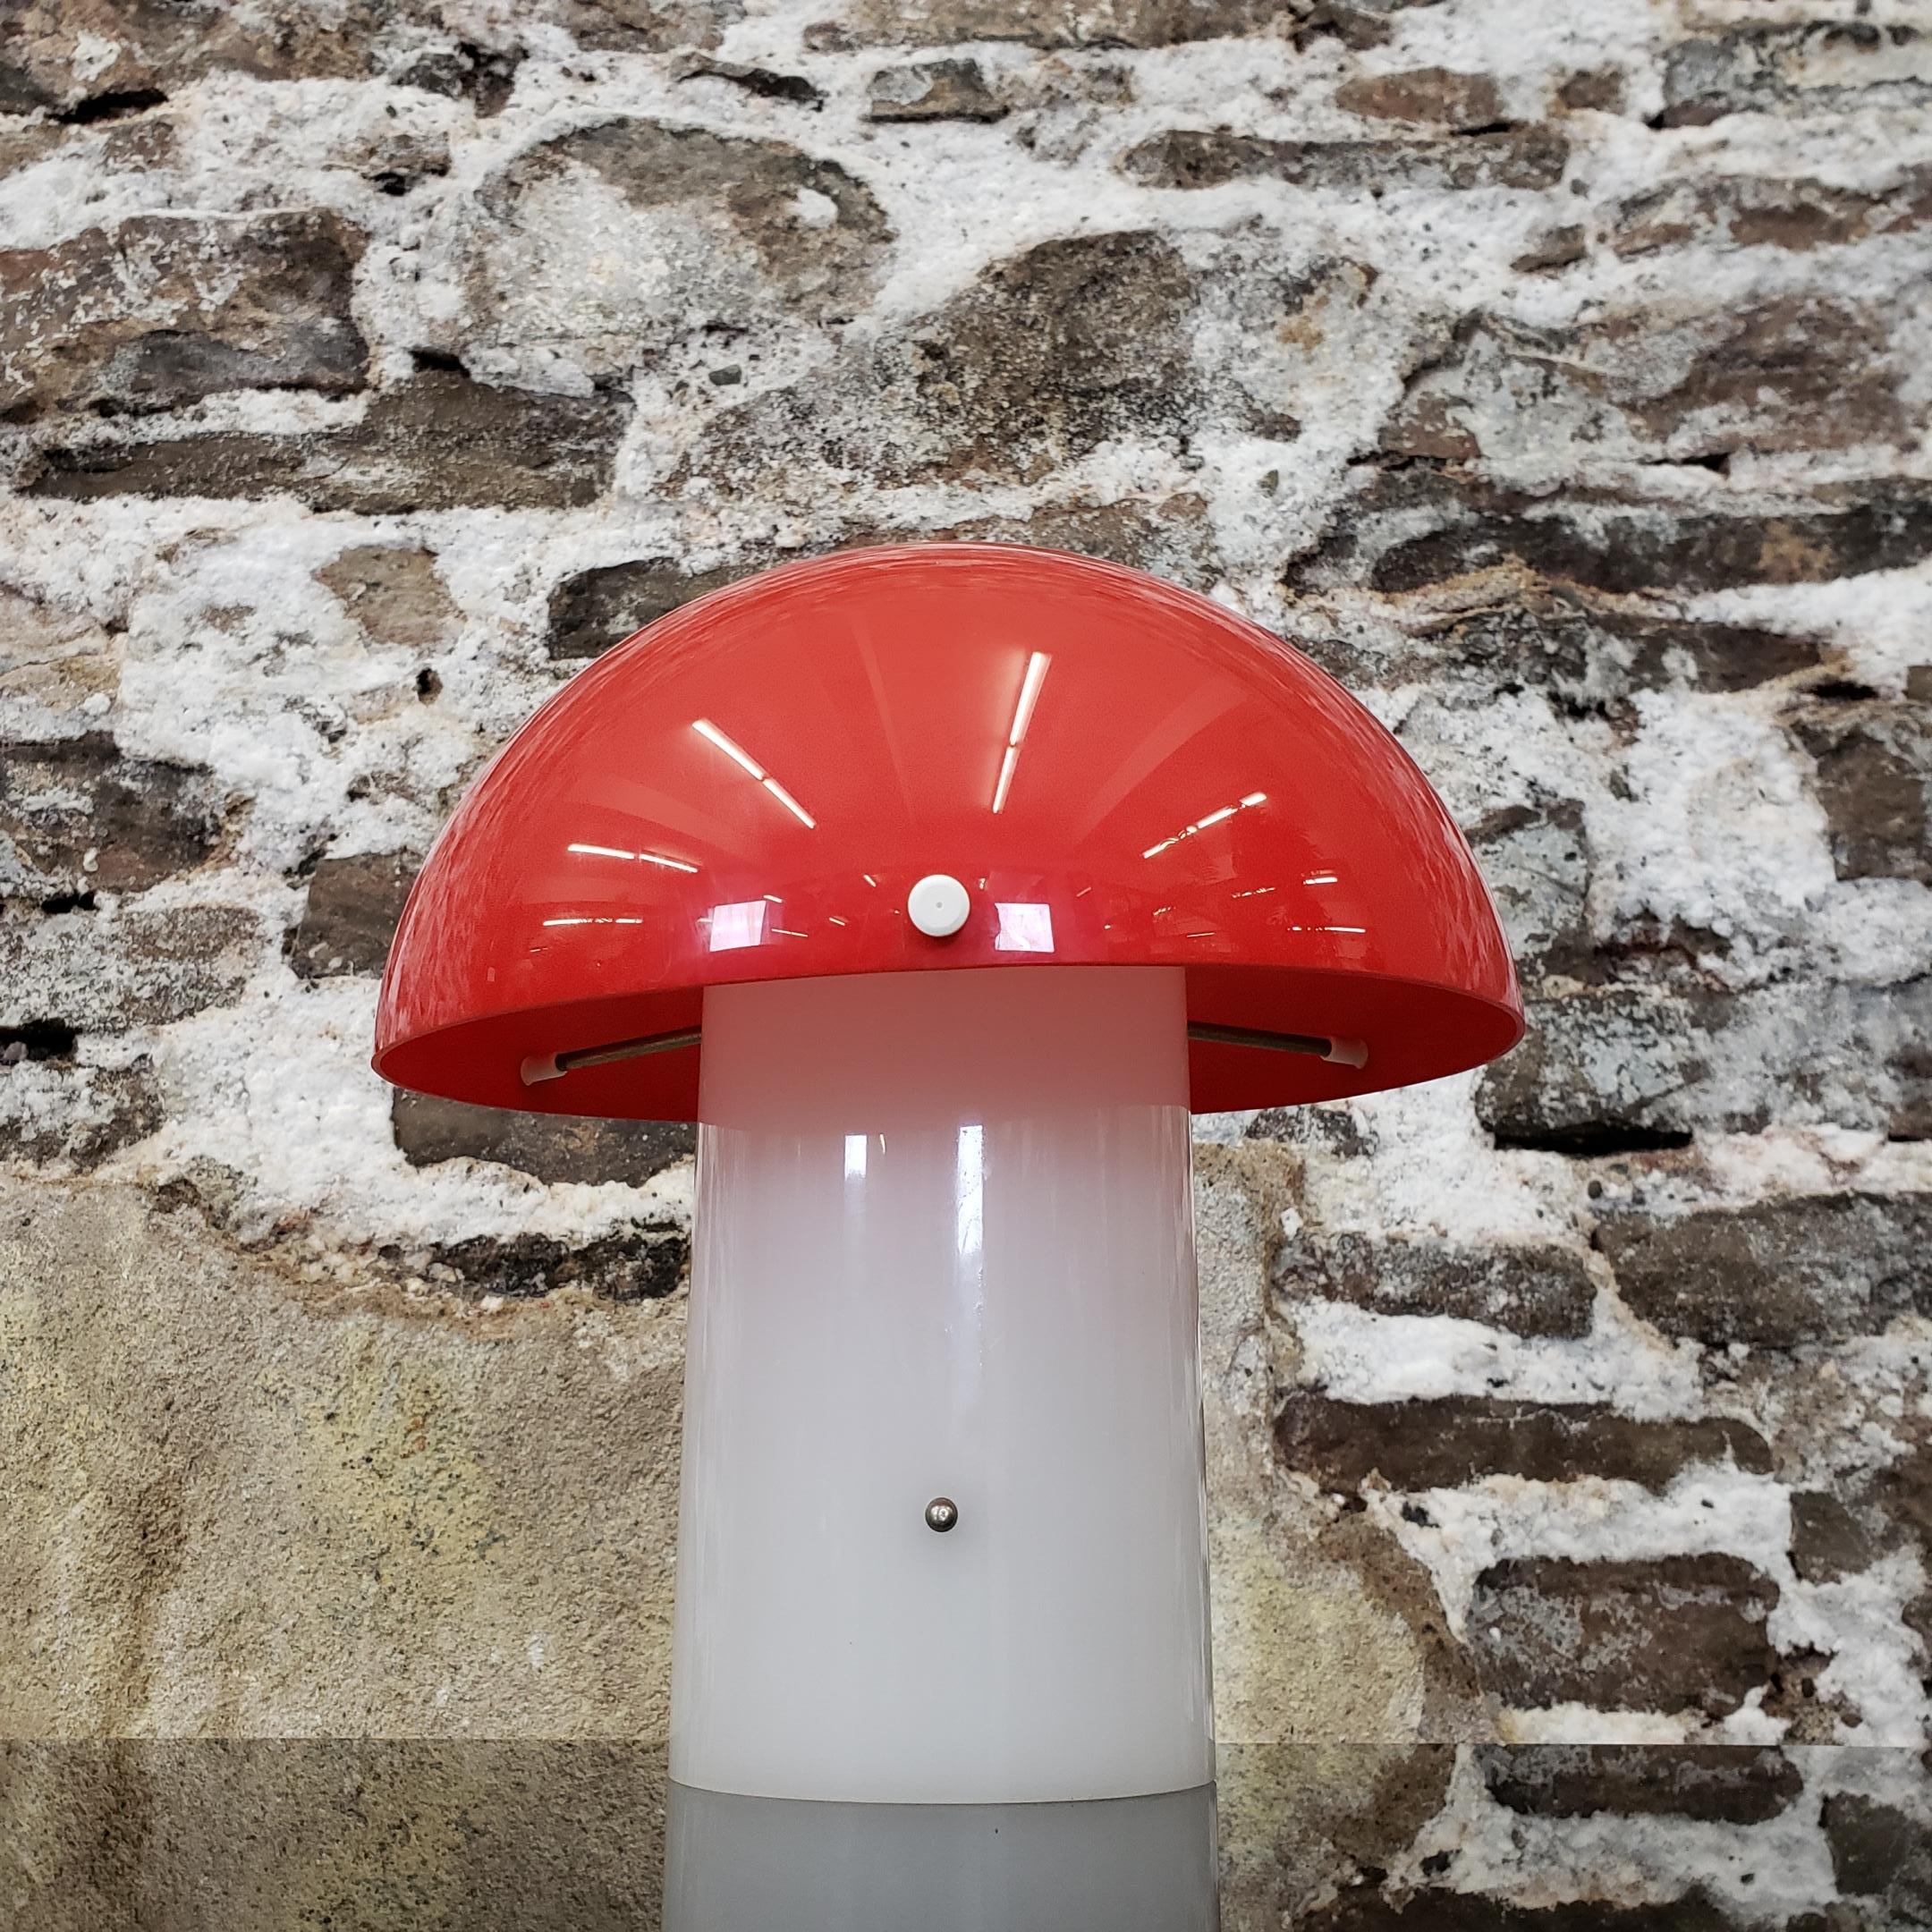 Space Age mushroom lamp with bright red shade and white base.